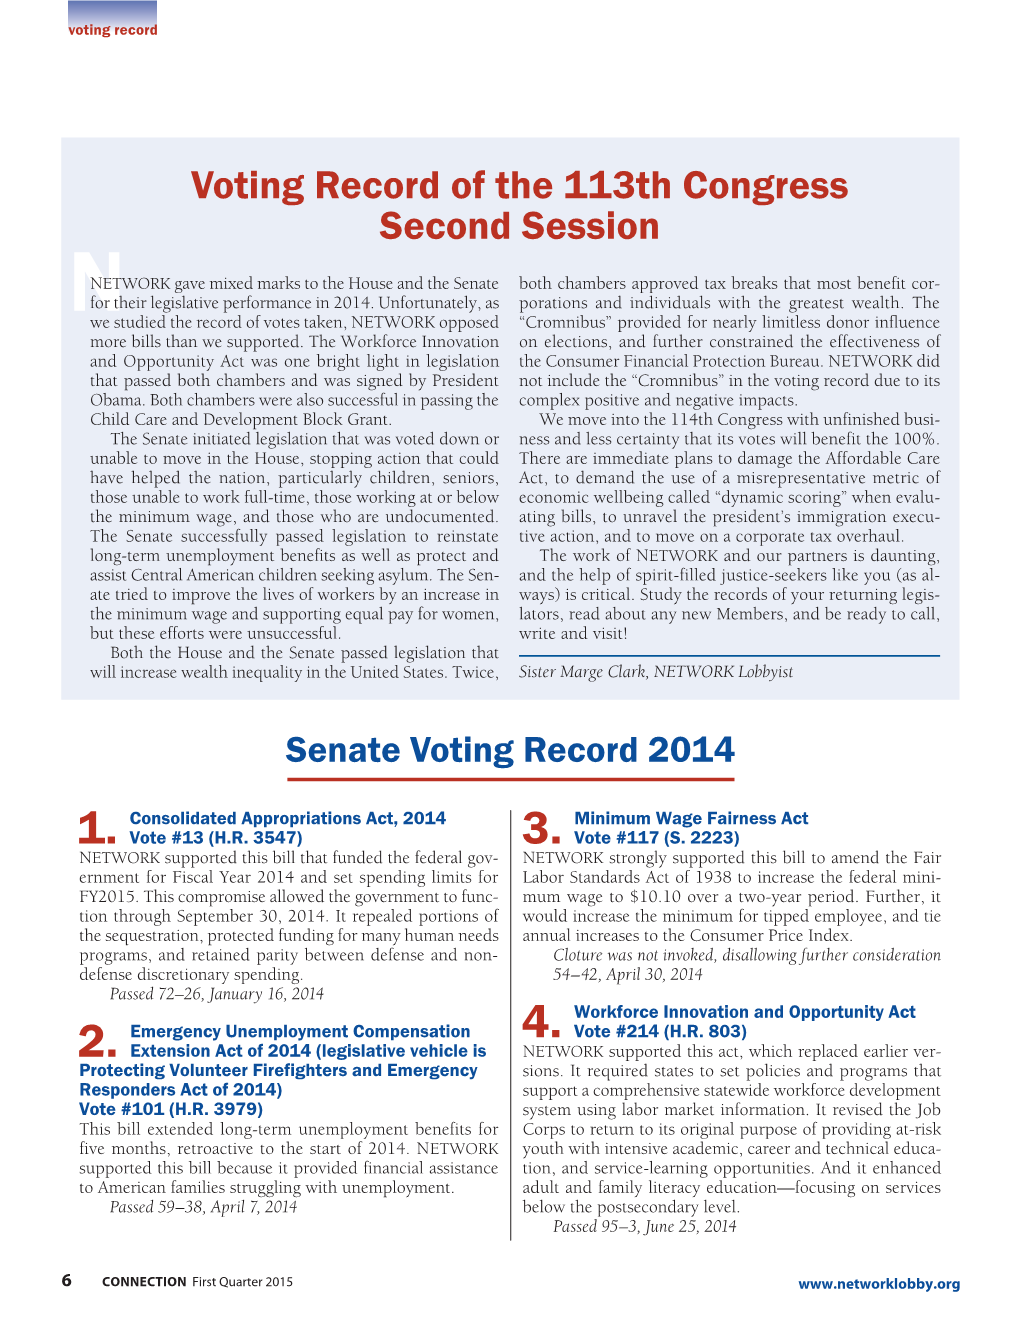 2014 Congressional Voting Record